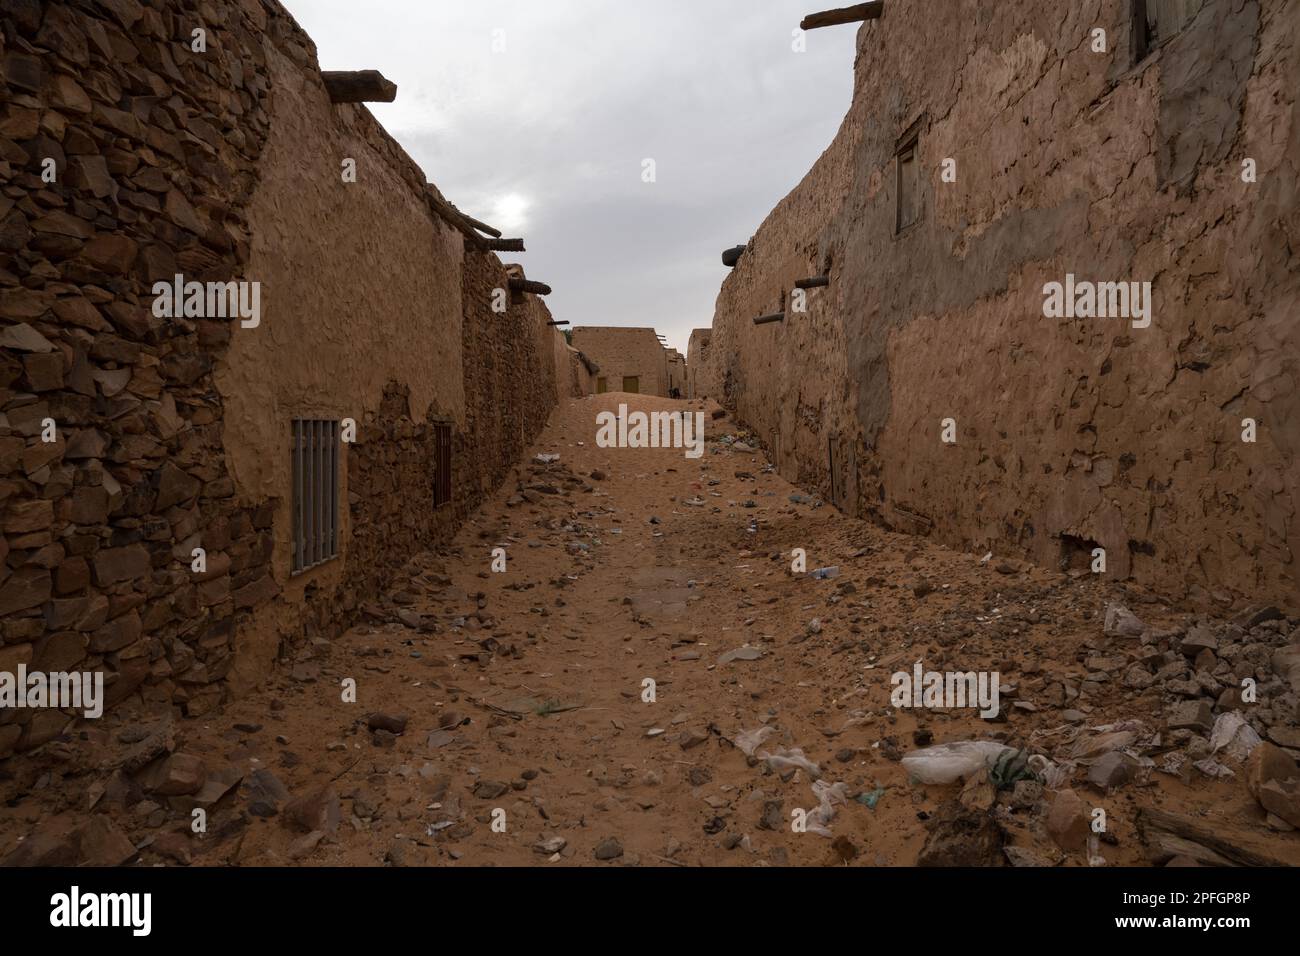 A street in the ancient city of Chinguetti, Mauritania, filled with sand and flanked by historic stone buildings, with goats standing in foreground. Stock Photo